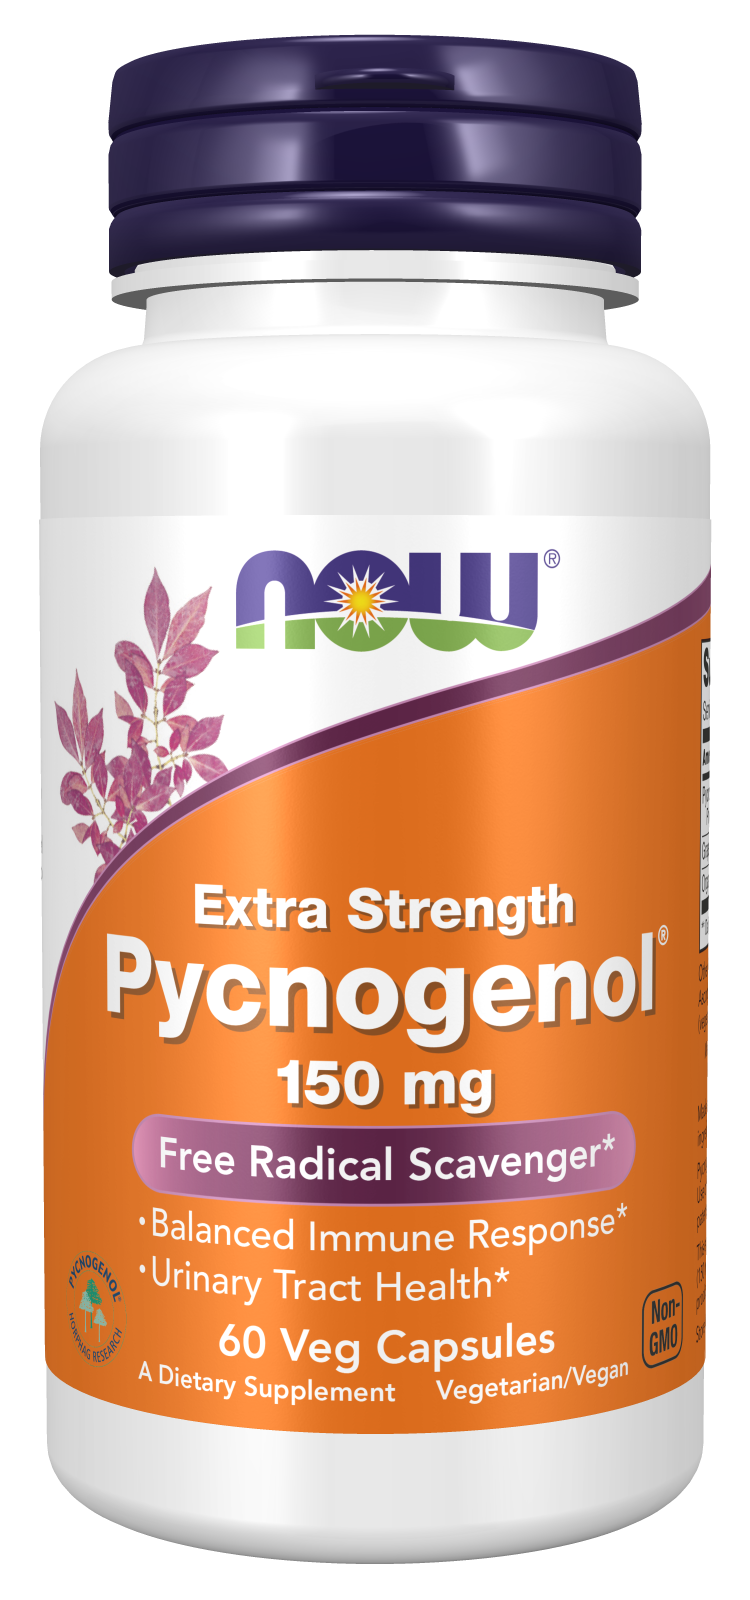 Change of Treatment Parameters for Pycnogenol 150 mg and 300 mg versus